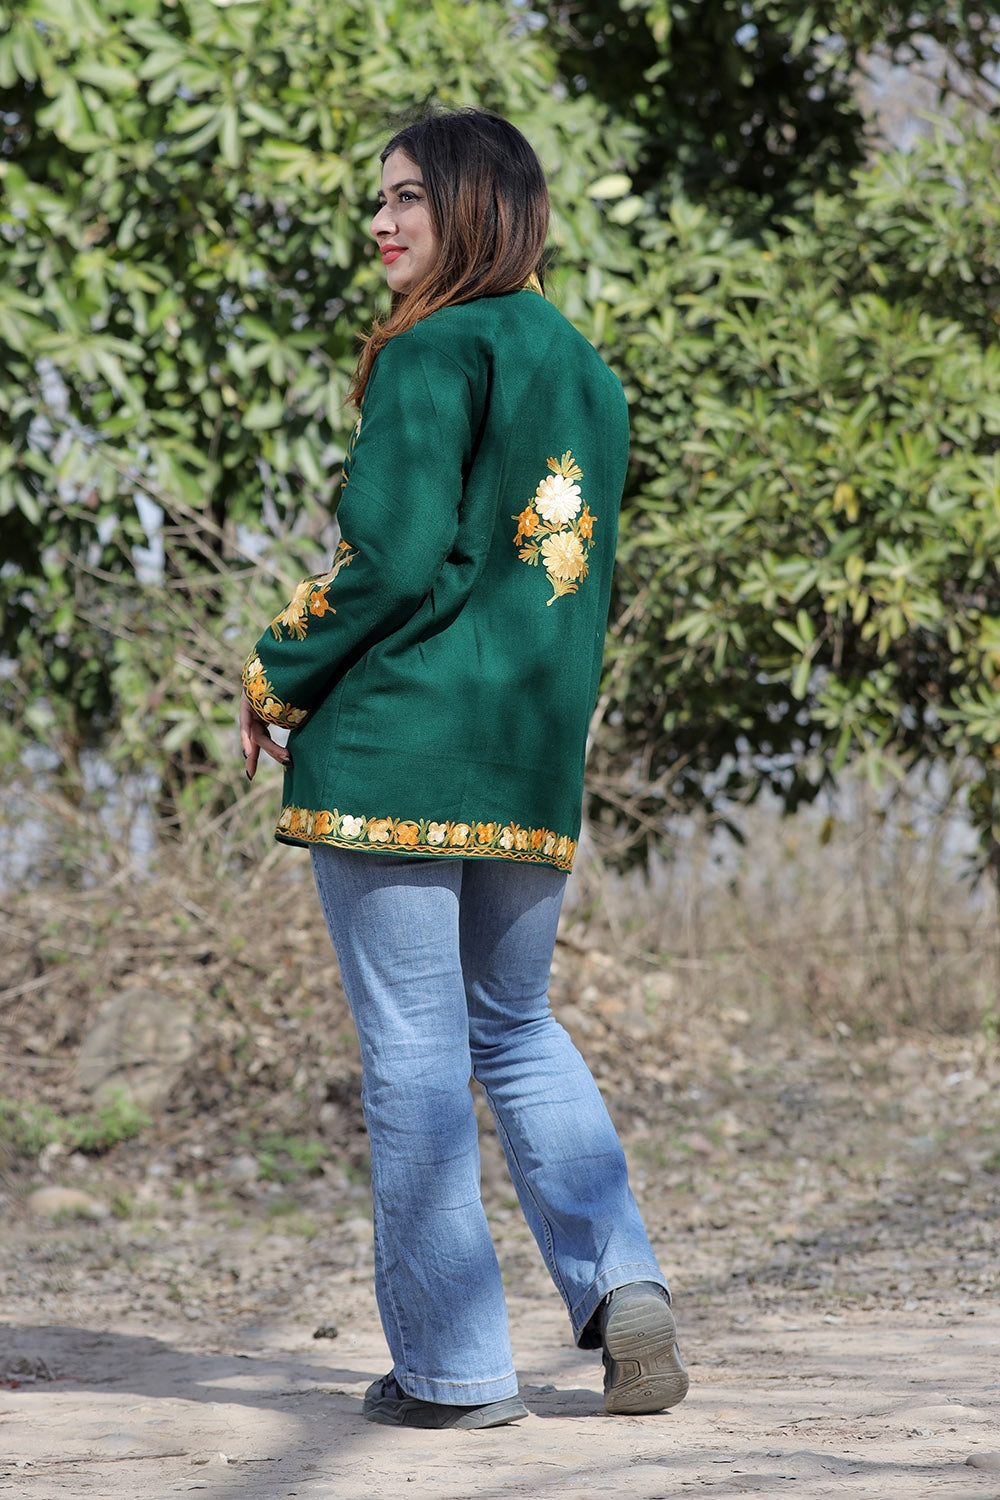 Buy Gold and Green Color Kurta Payjama With Jacket Online